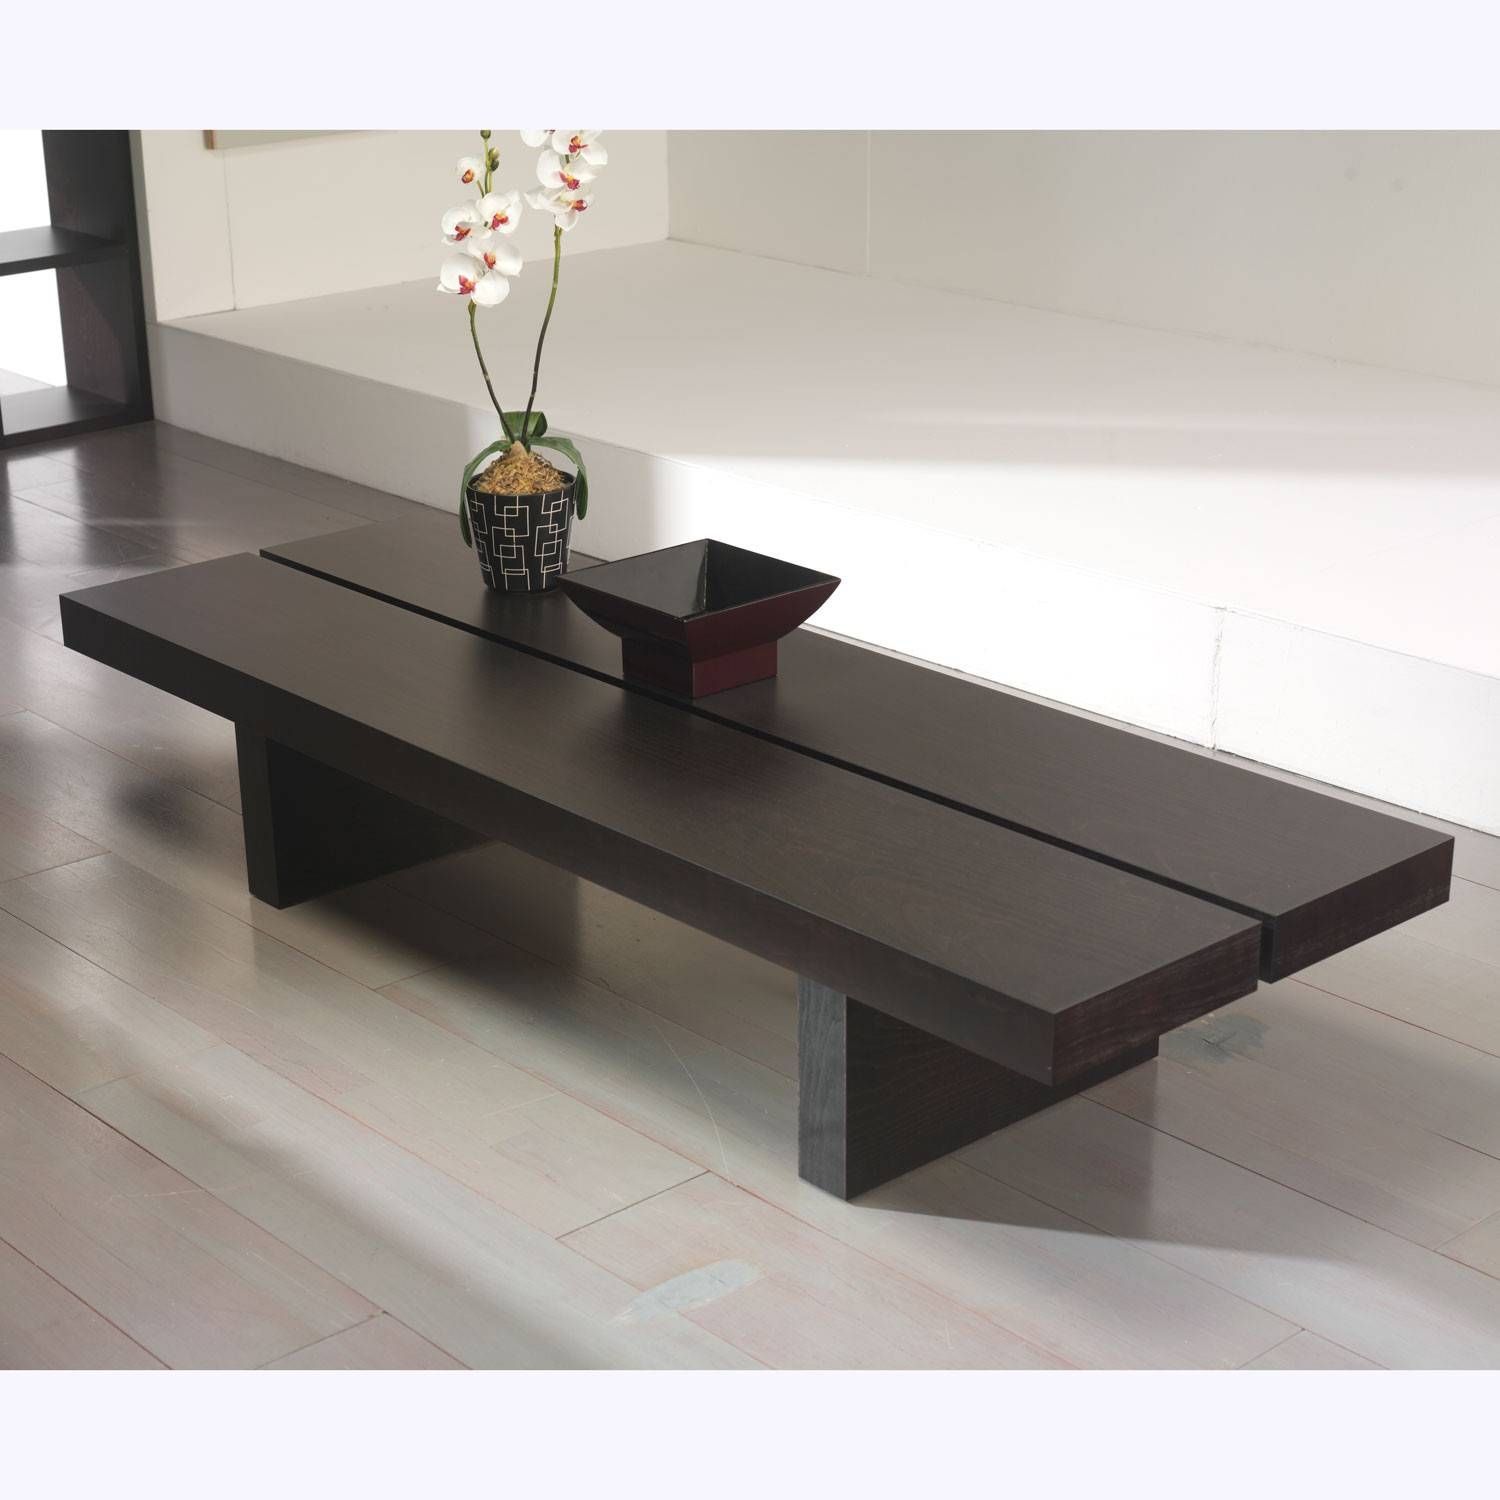 Perfect Low Coffee Table – Low Coffee Table Height, Low Level In Large Low Level Coffee Tables (View 17 of 30)